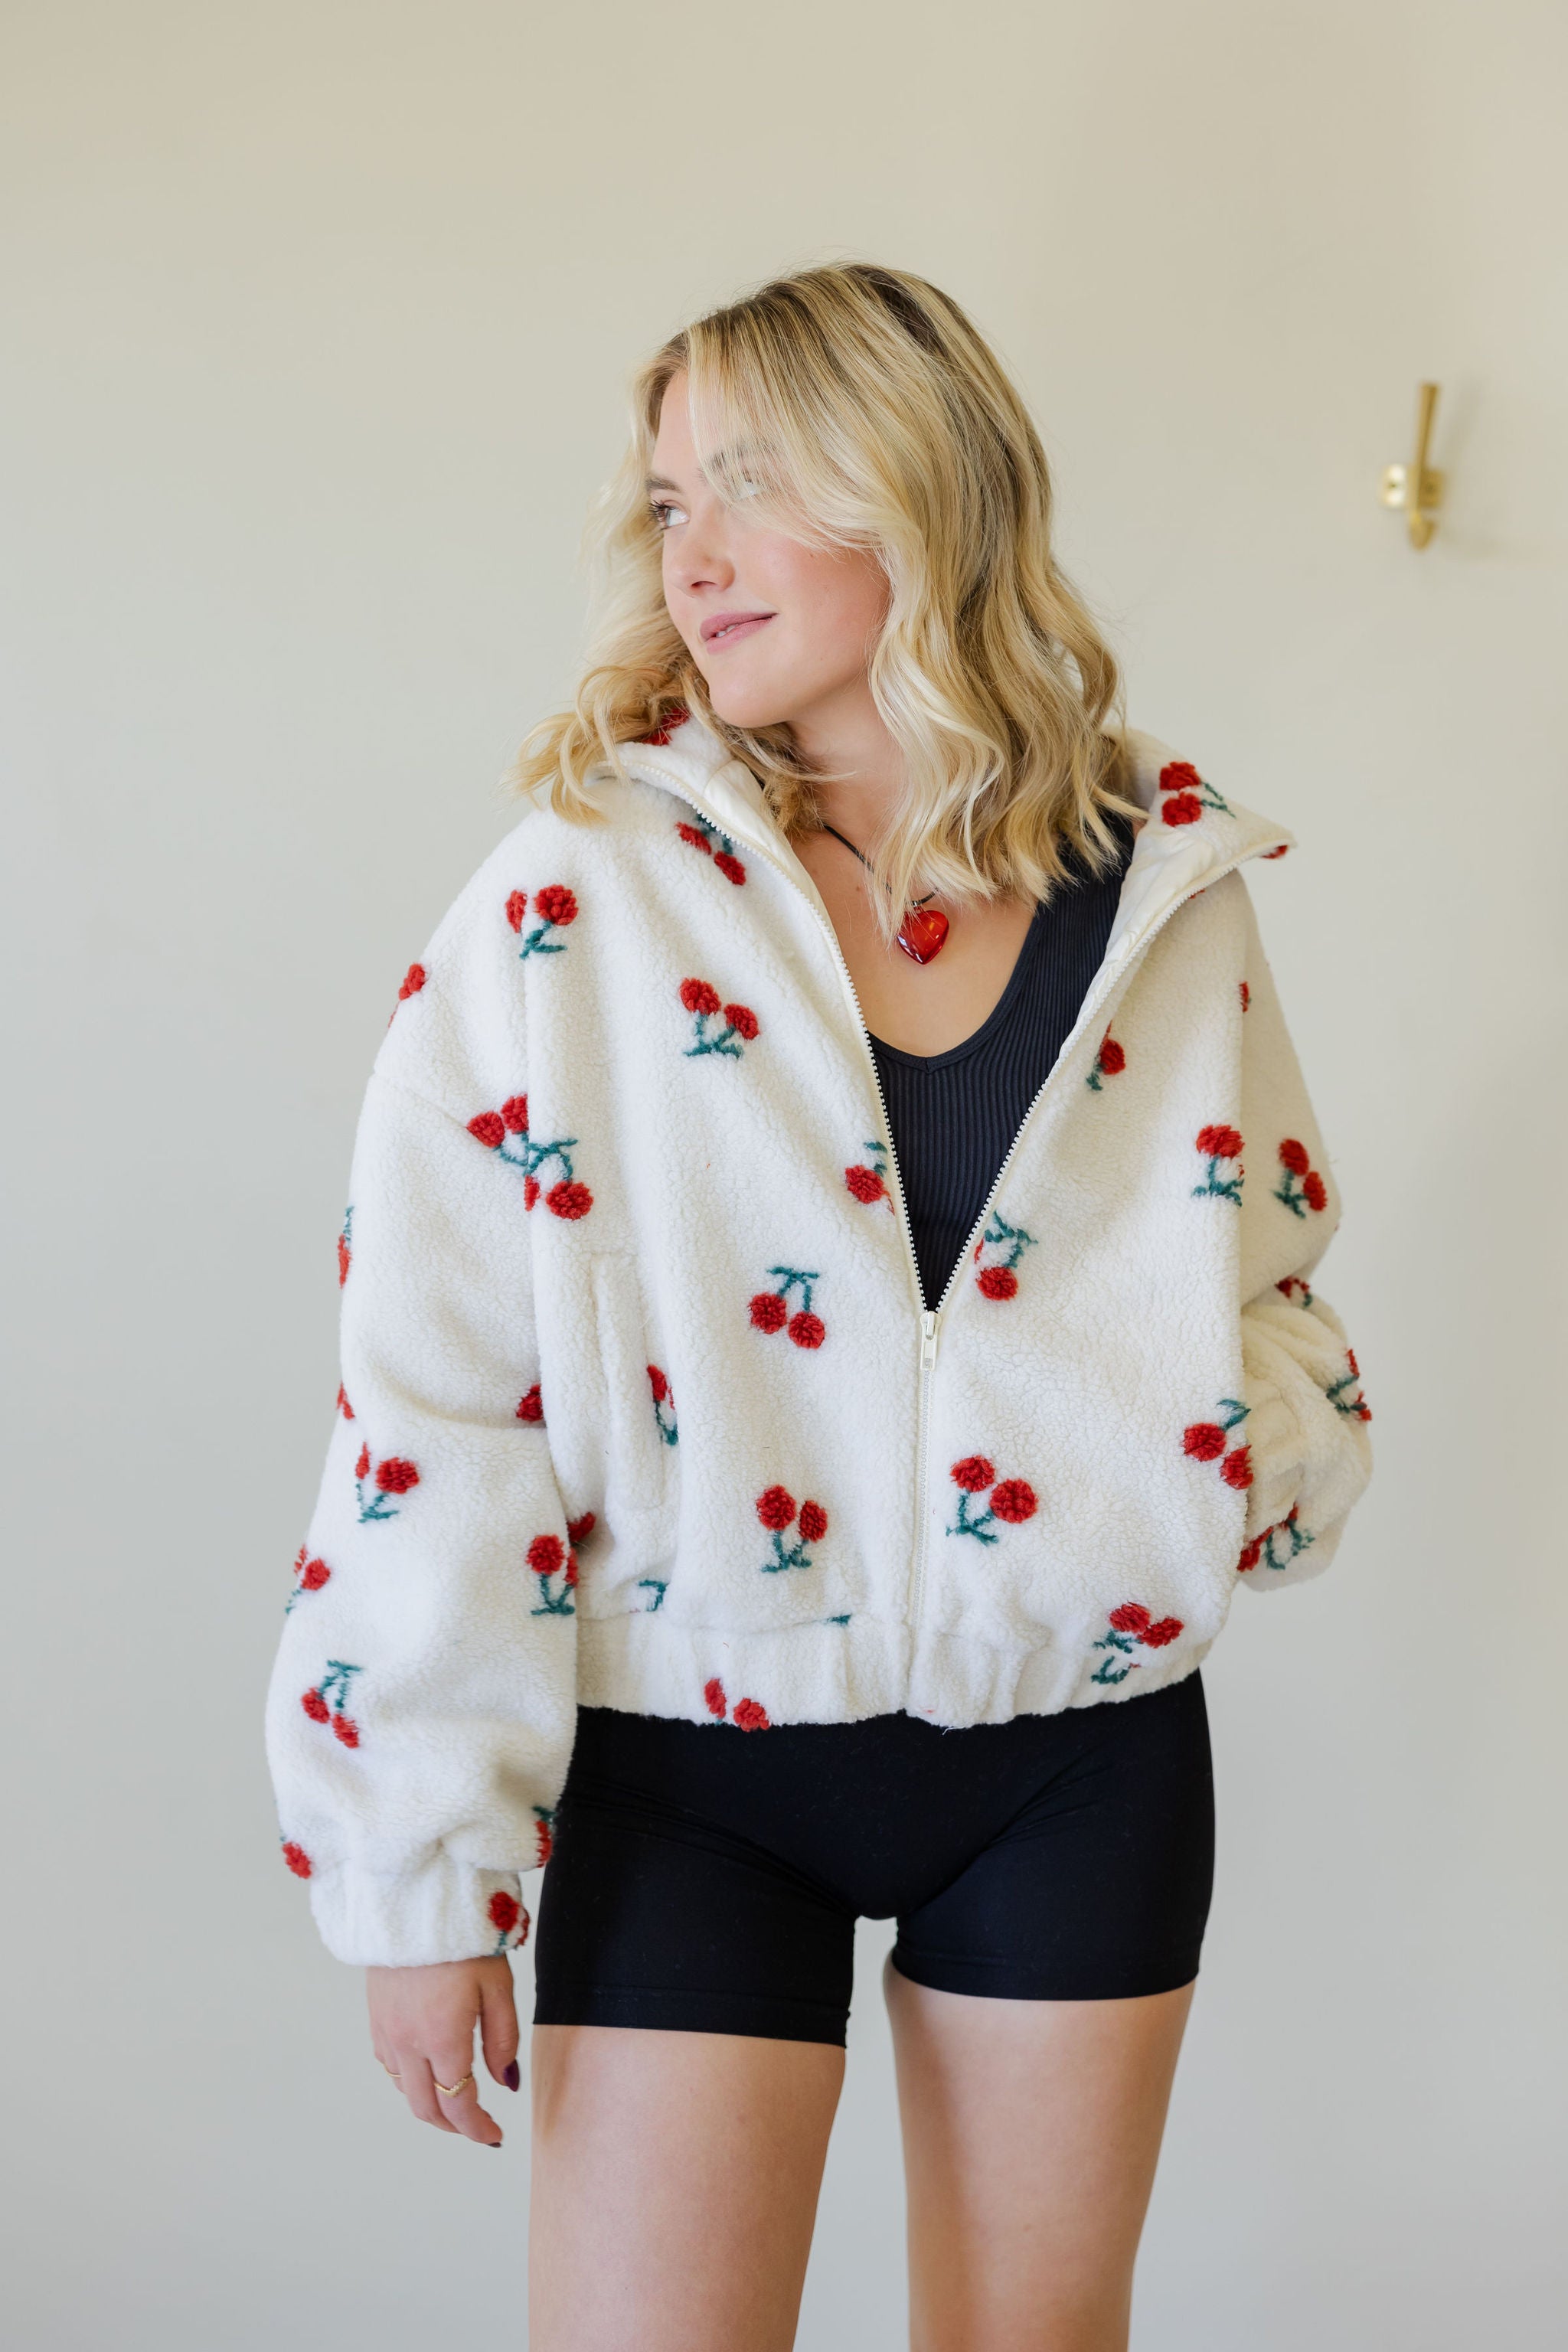 Moving On Cherry Printed Jacket by For Good